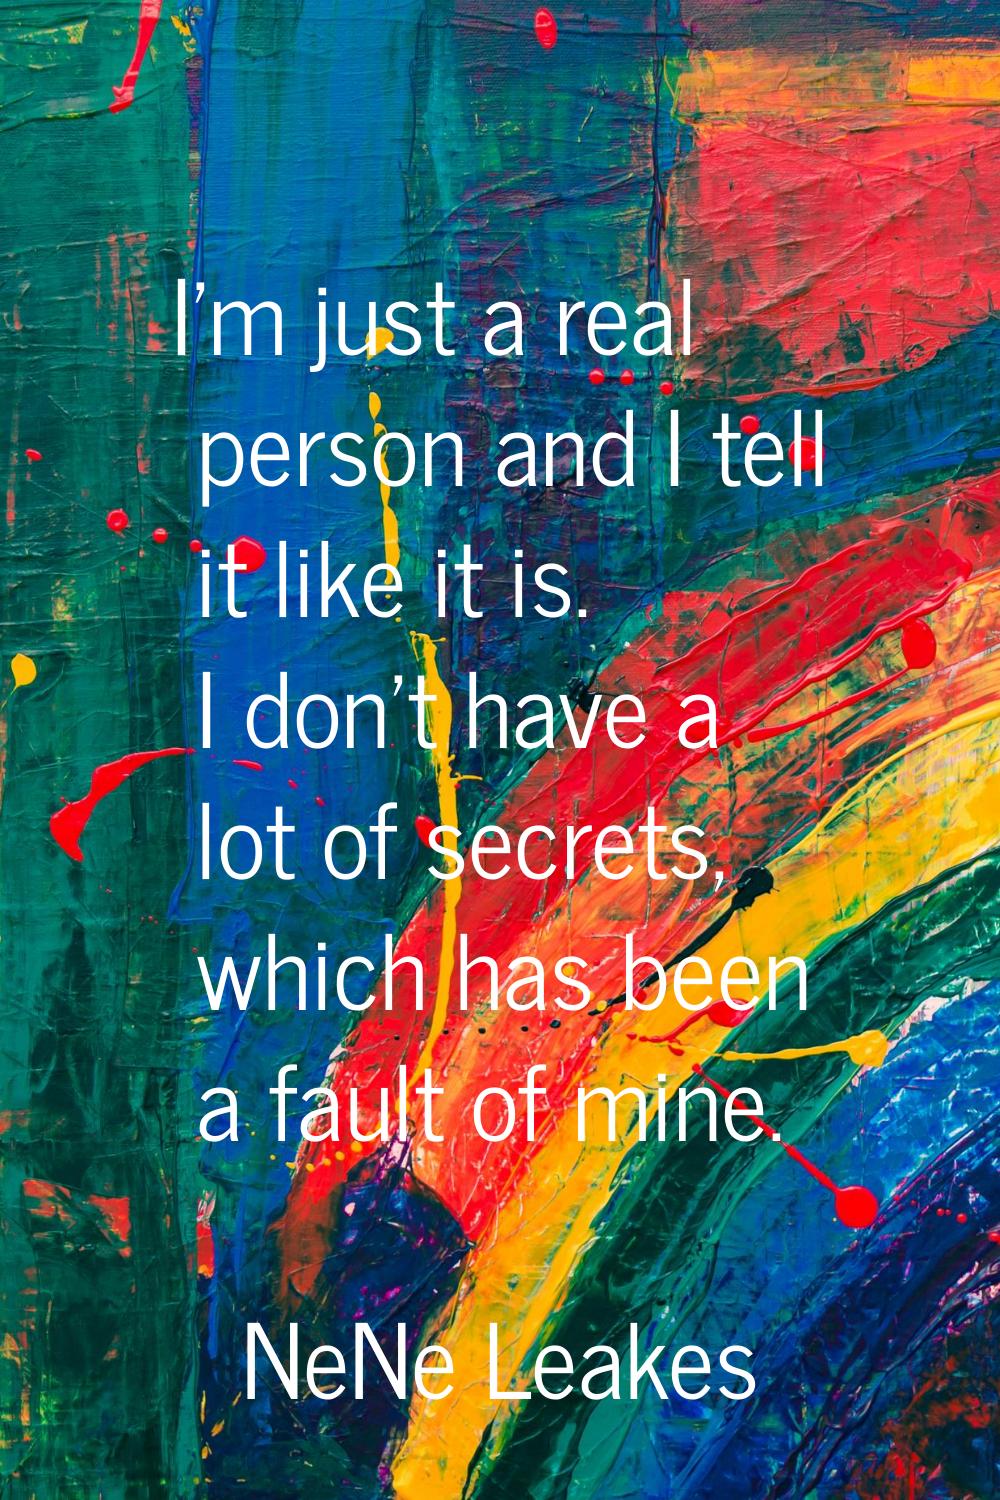 I'm just a real person and I tell it like it is. I don't have a lot of secrets, which has been a fa